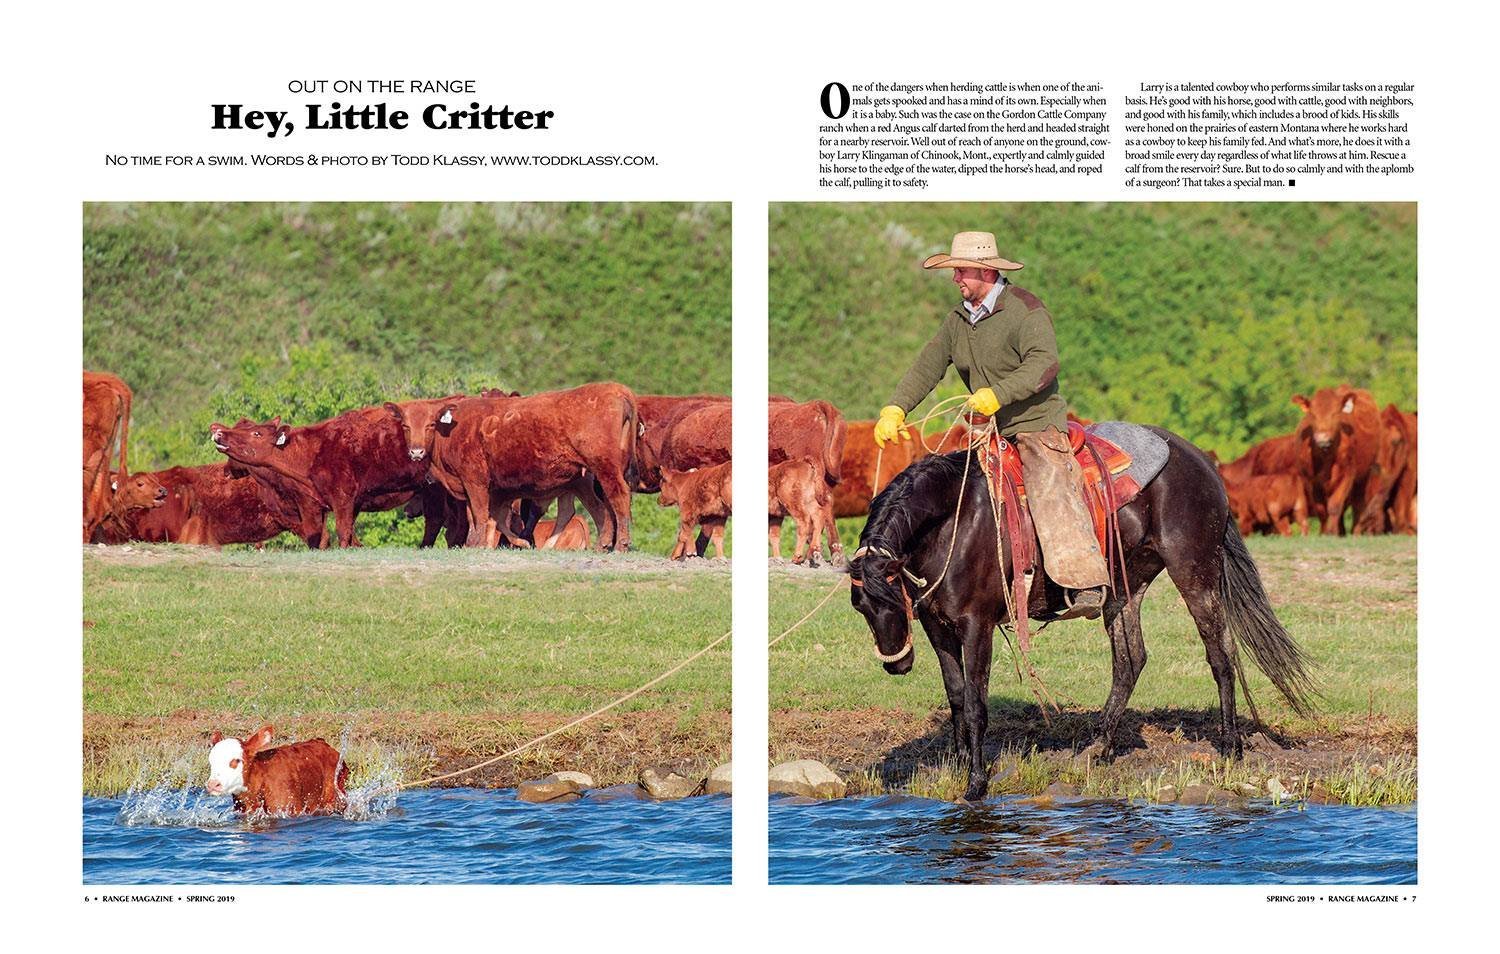 My photo of a cowboy roping a calf that wandered into a reservoir appeared in the spring 2019 issue of Range Magazine, seen here. I wrote the text in the article, too, which you can read below.